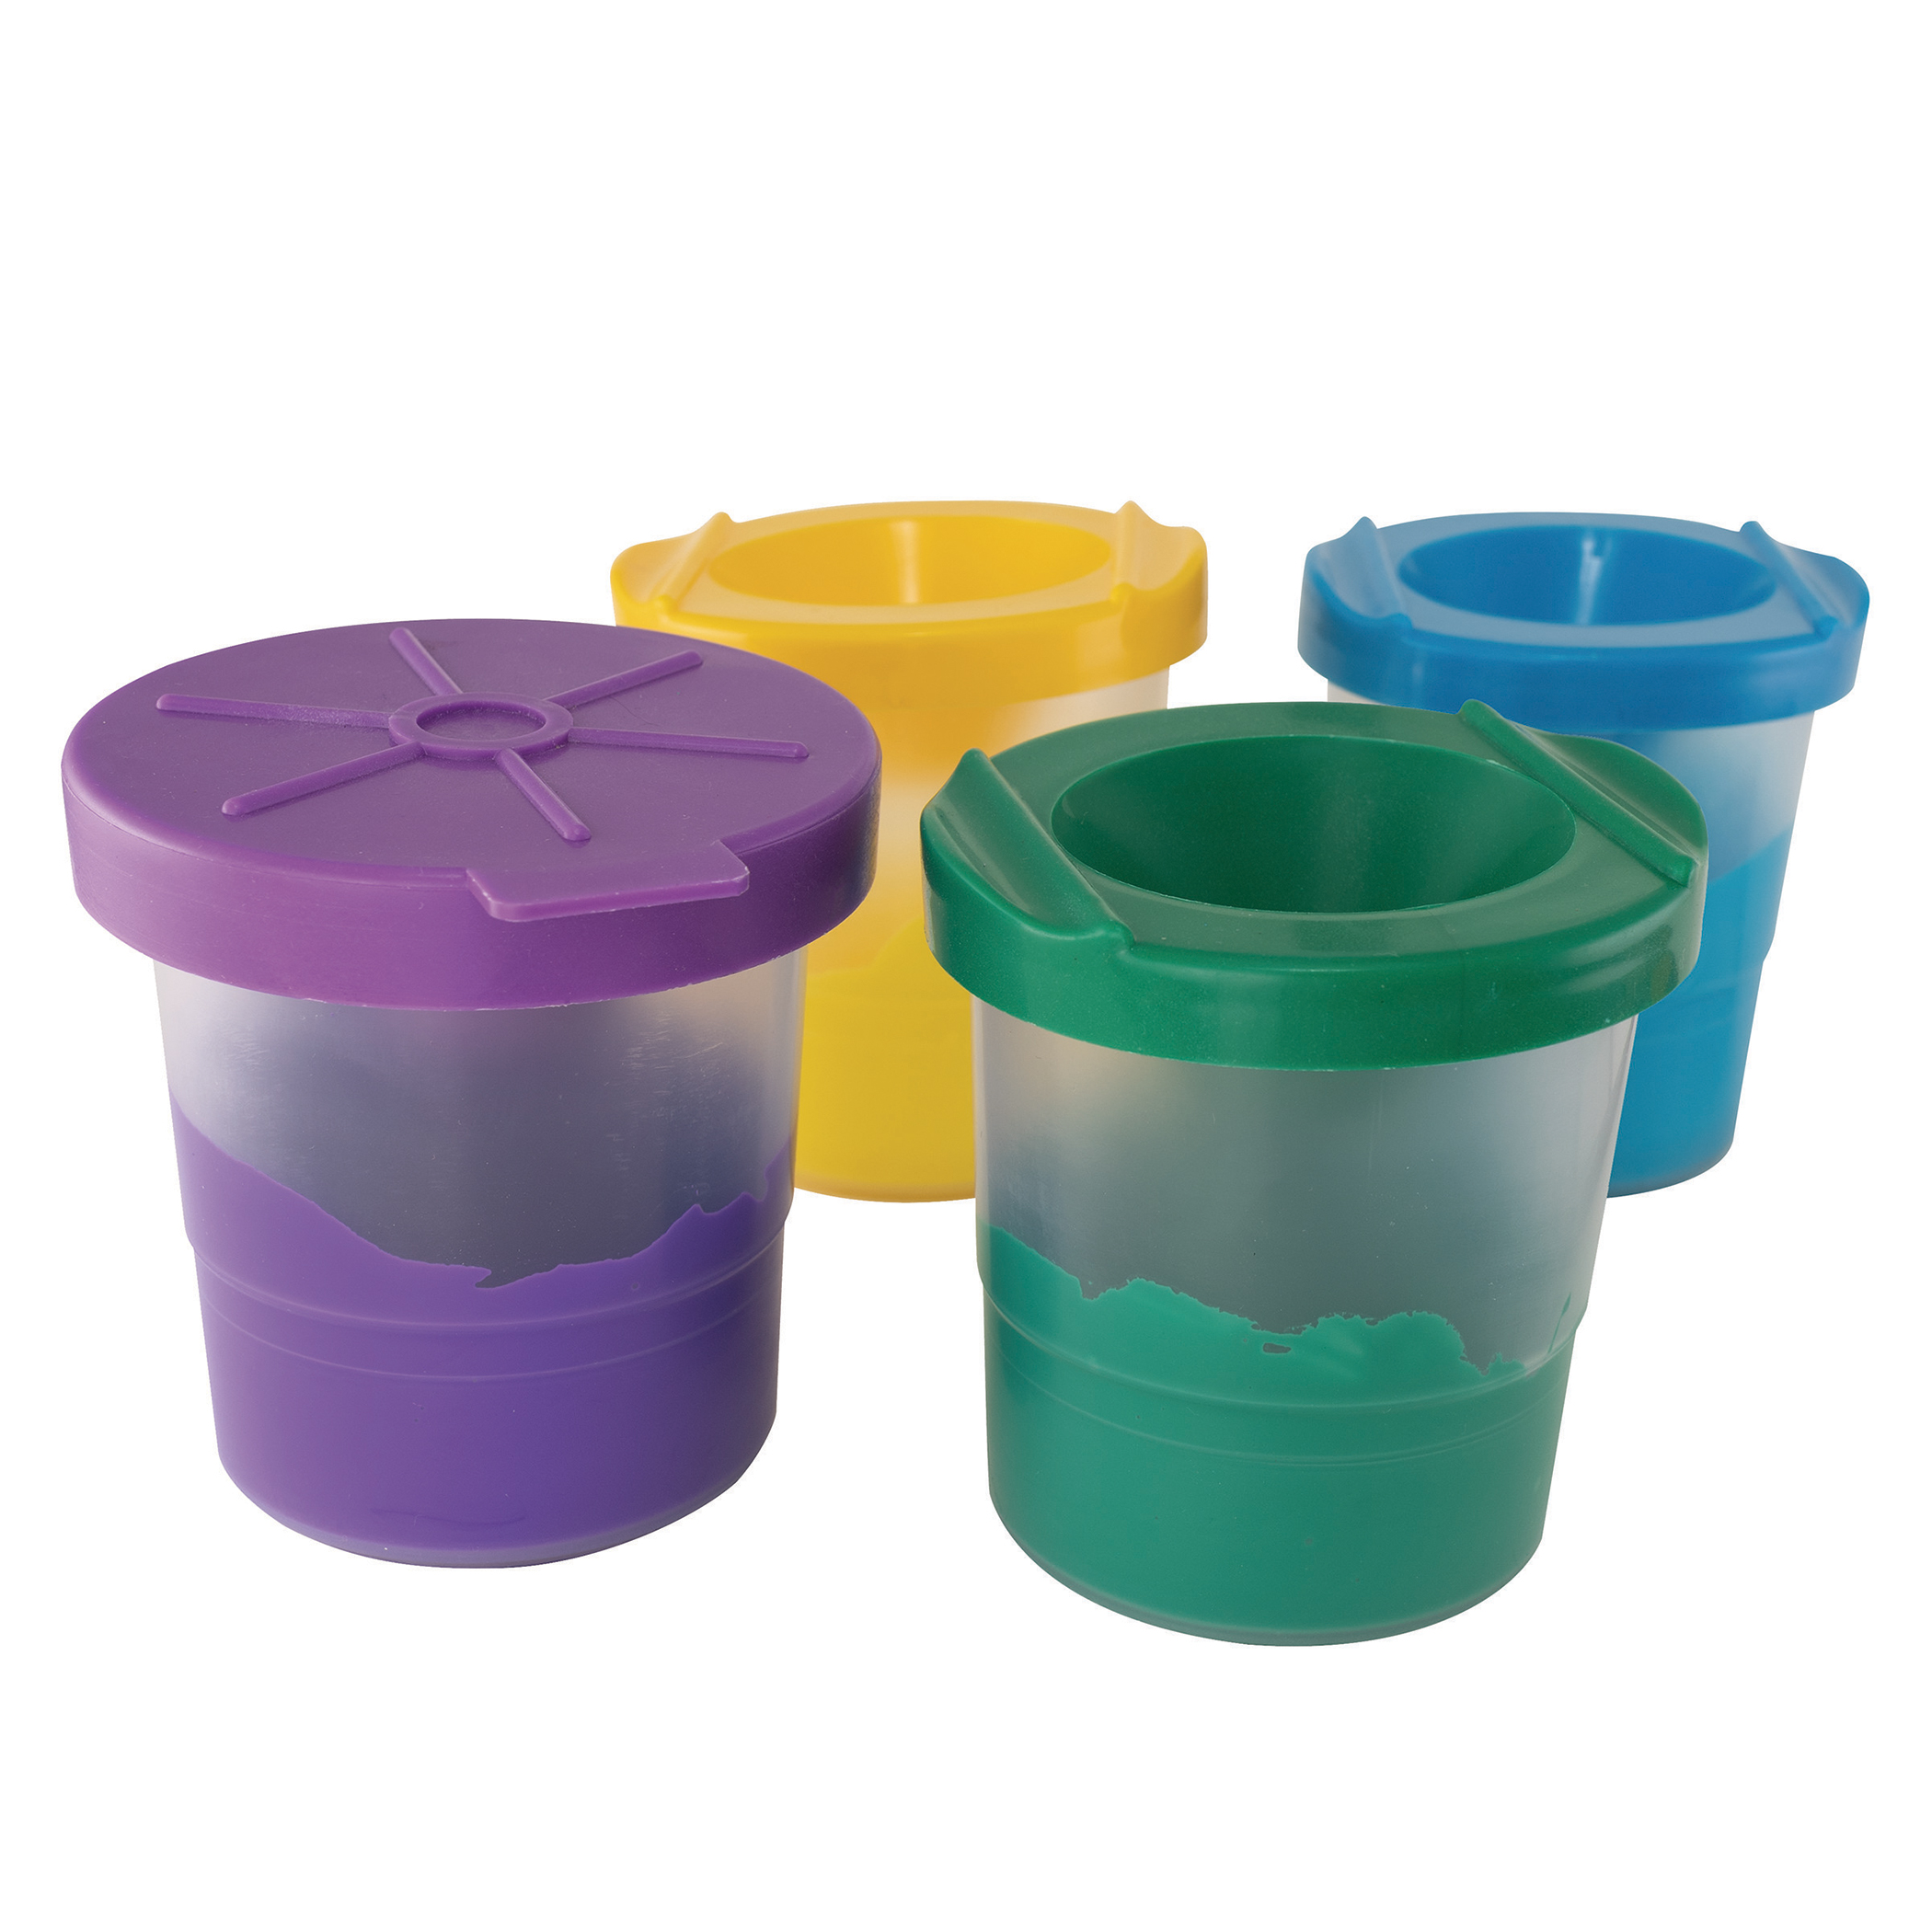 No-Spill Round Paint Cups with Colored Lids, 3 Dia., 10 Cups - CK-5100, Dixon Ticonderoga Co - Pacon